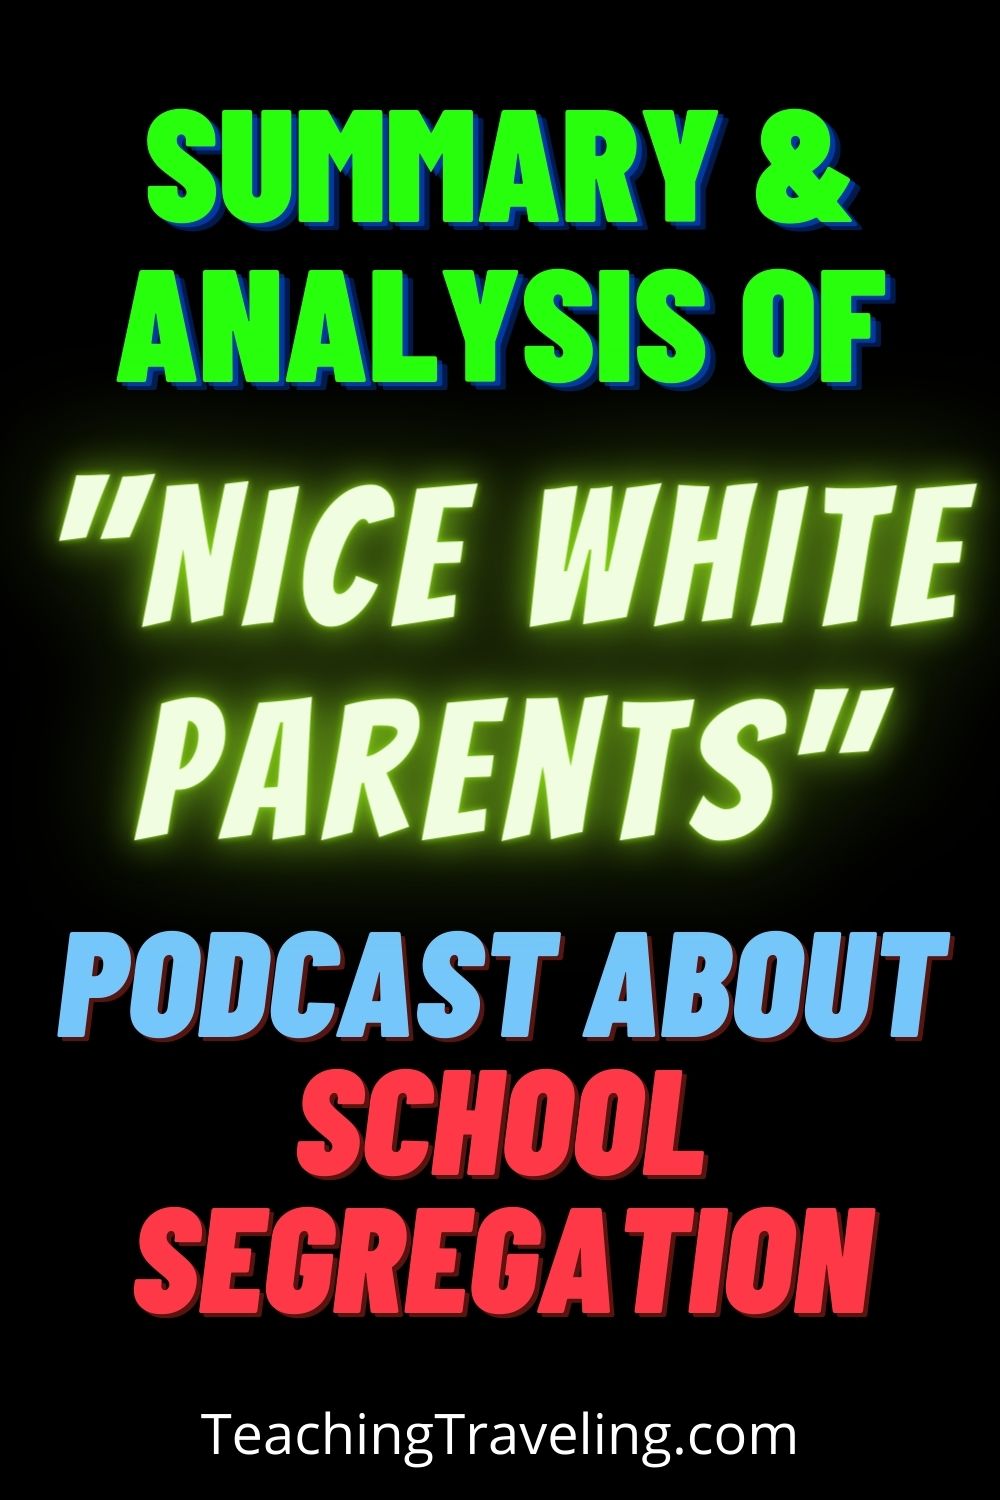 Nice White Parents podcast summary and analysis